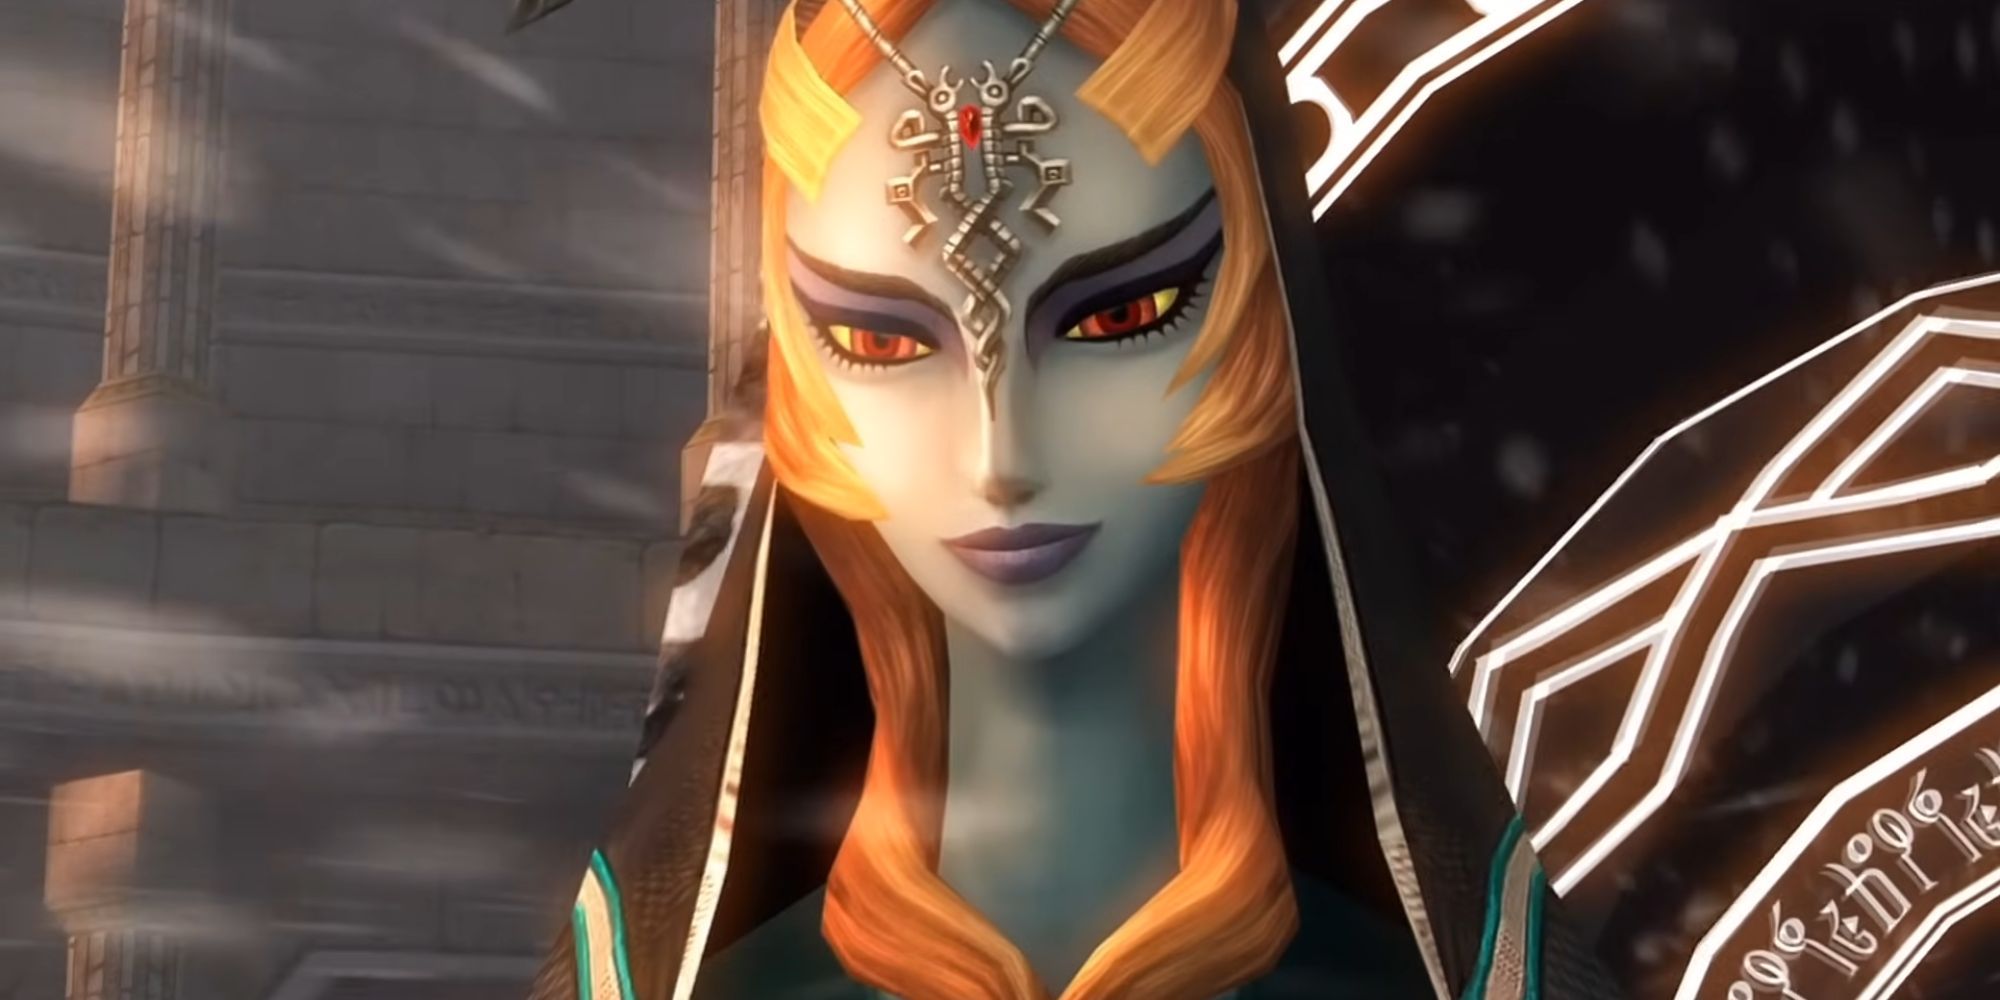 Midna goes back to the Twilight Realm.